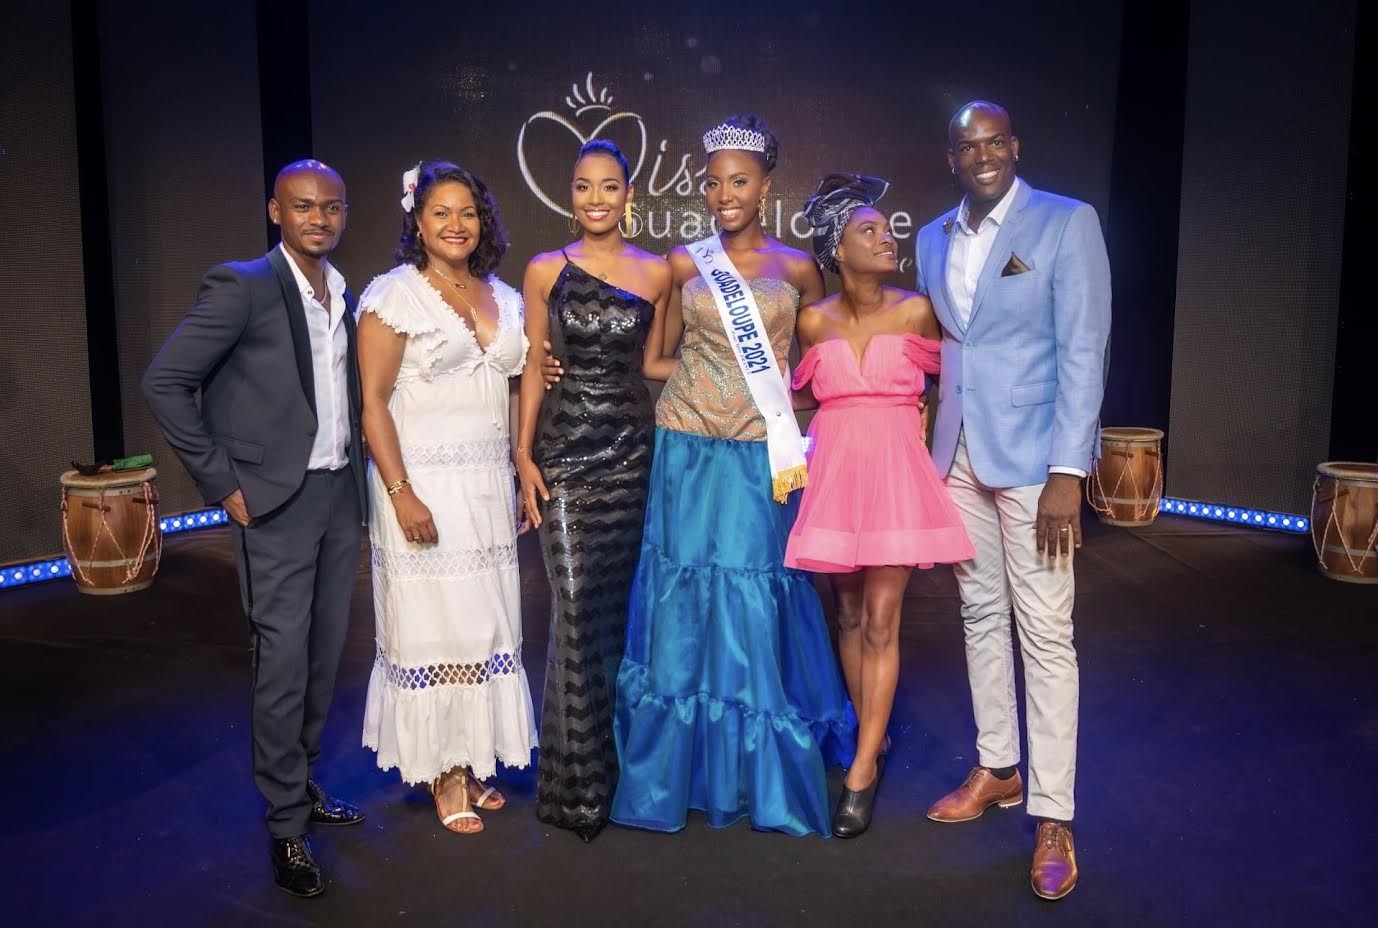 Lauranza jury Miss Guadeloupe 2021 pour Miss France